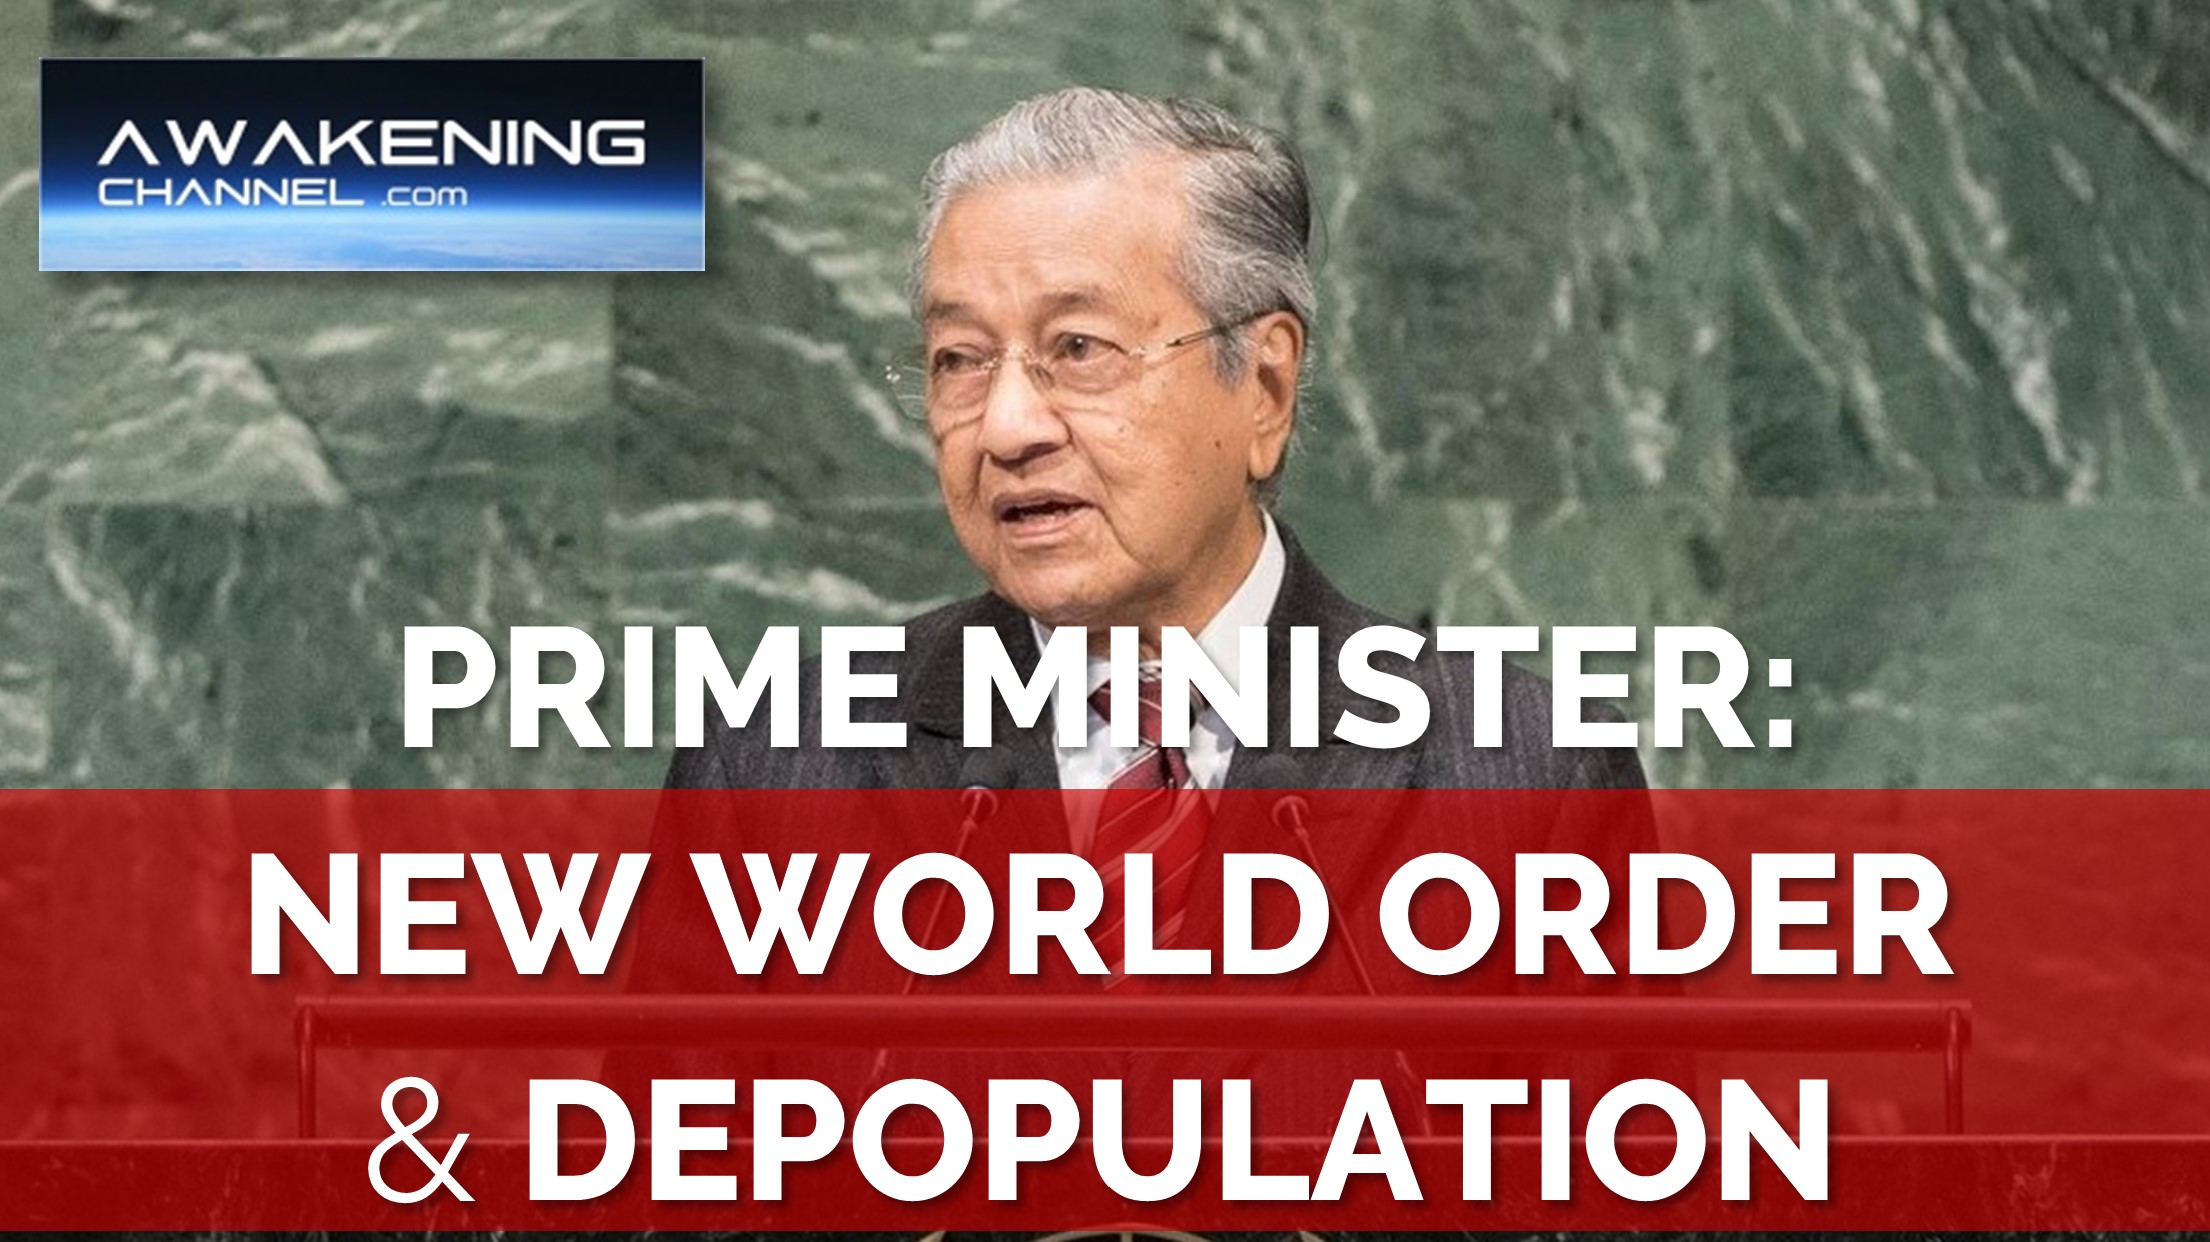 DEPOPULATION & THE NEW WORLD ORDER, By The Malaysia Prime Minister